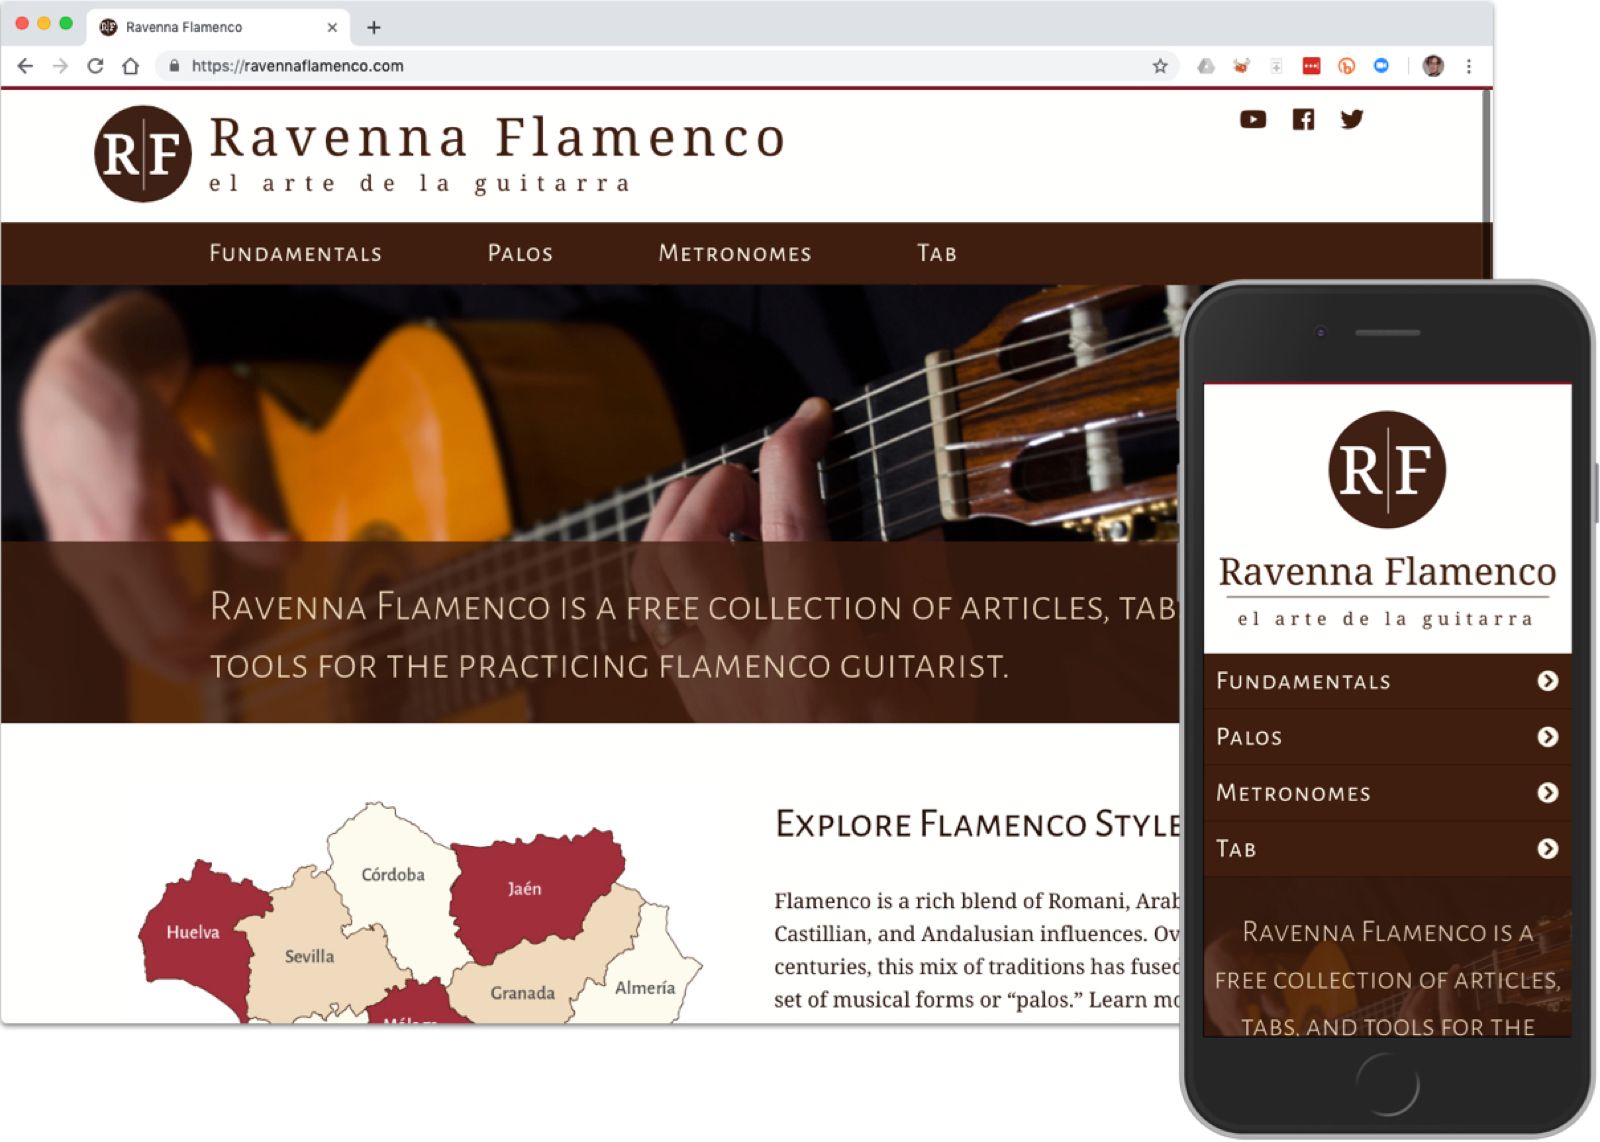 Screenshots of the redesigned Ravenna Flamenco home page on desktop and mobile